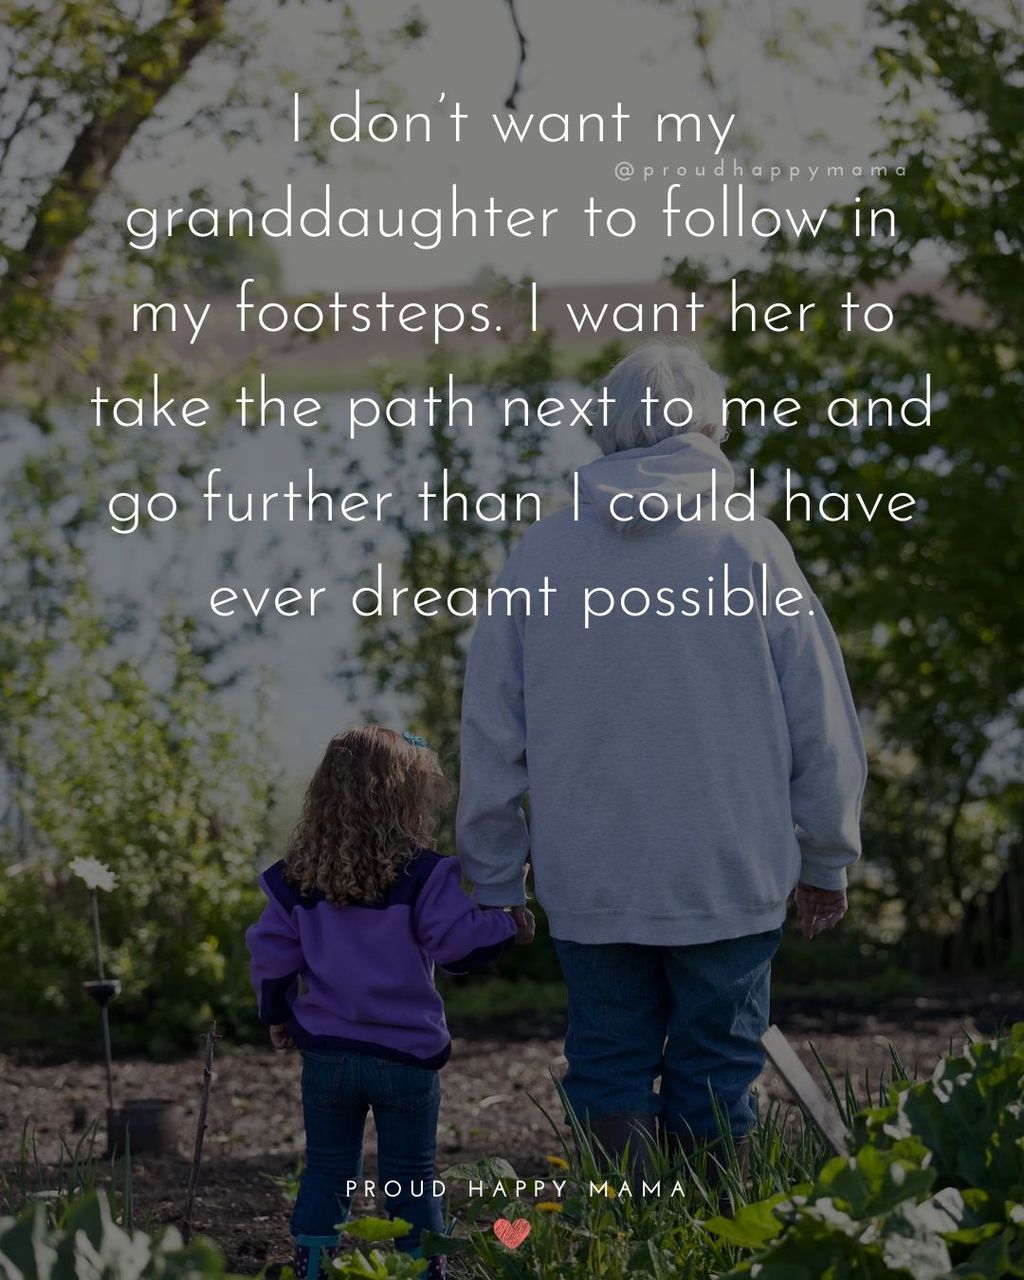 Young granddaughter with grandmother holding hands with back to the camera in a vegetable garden. Message to my granddaughter text overlay, ‘I don’t want my granddaughter to follow in my footsteps. I want her to take the path next to me and go further than I could have ever dreamt possible.’